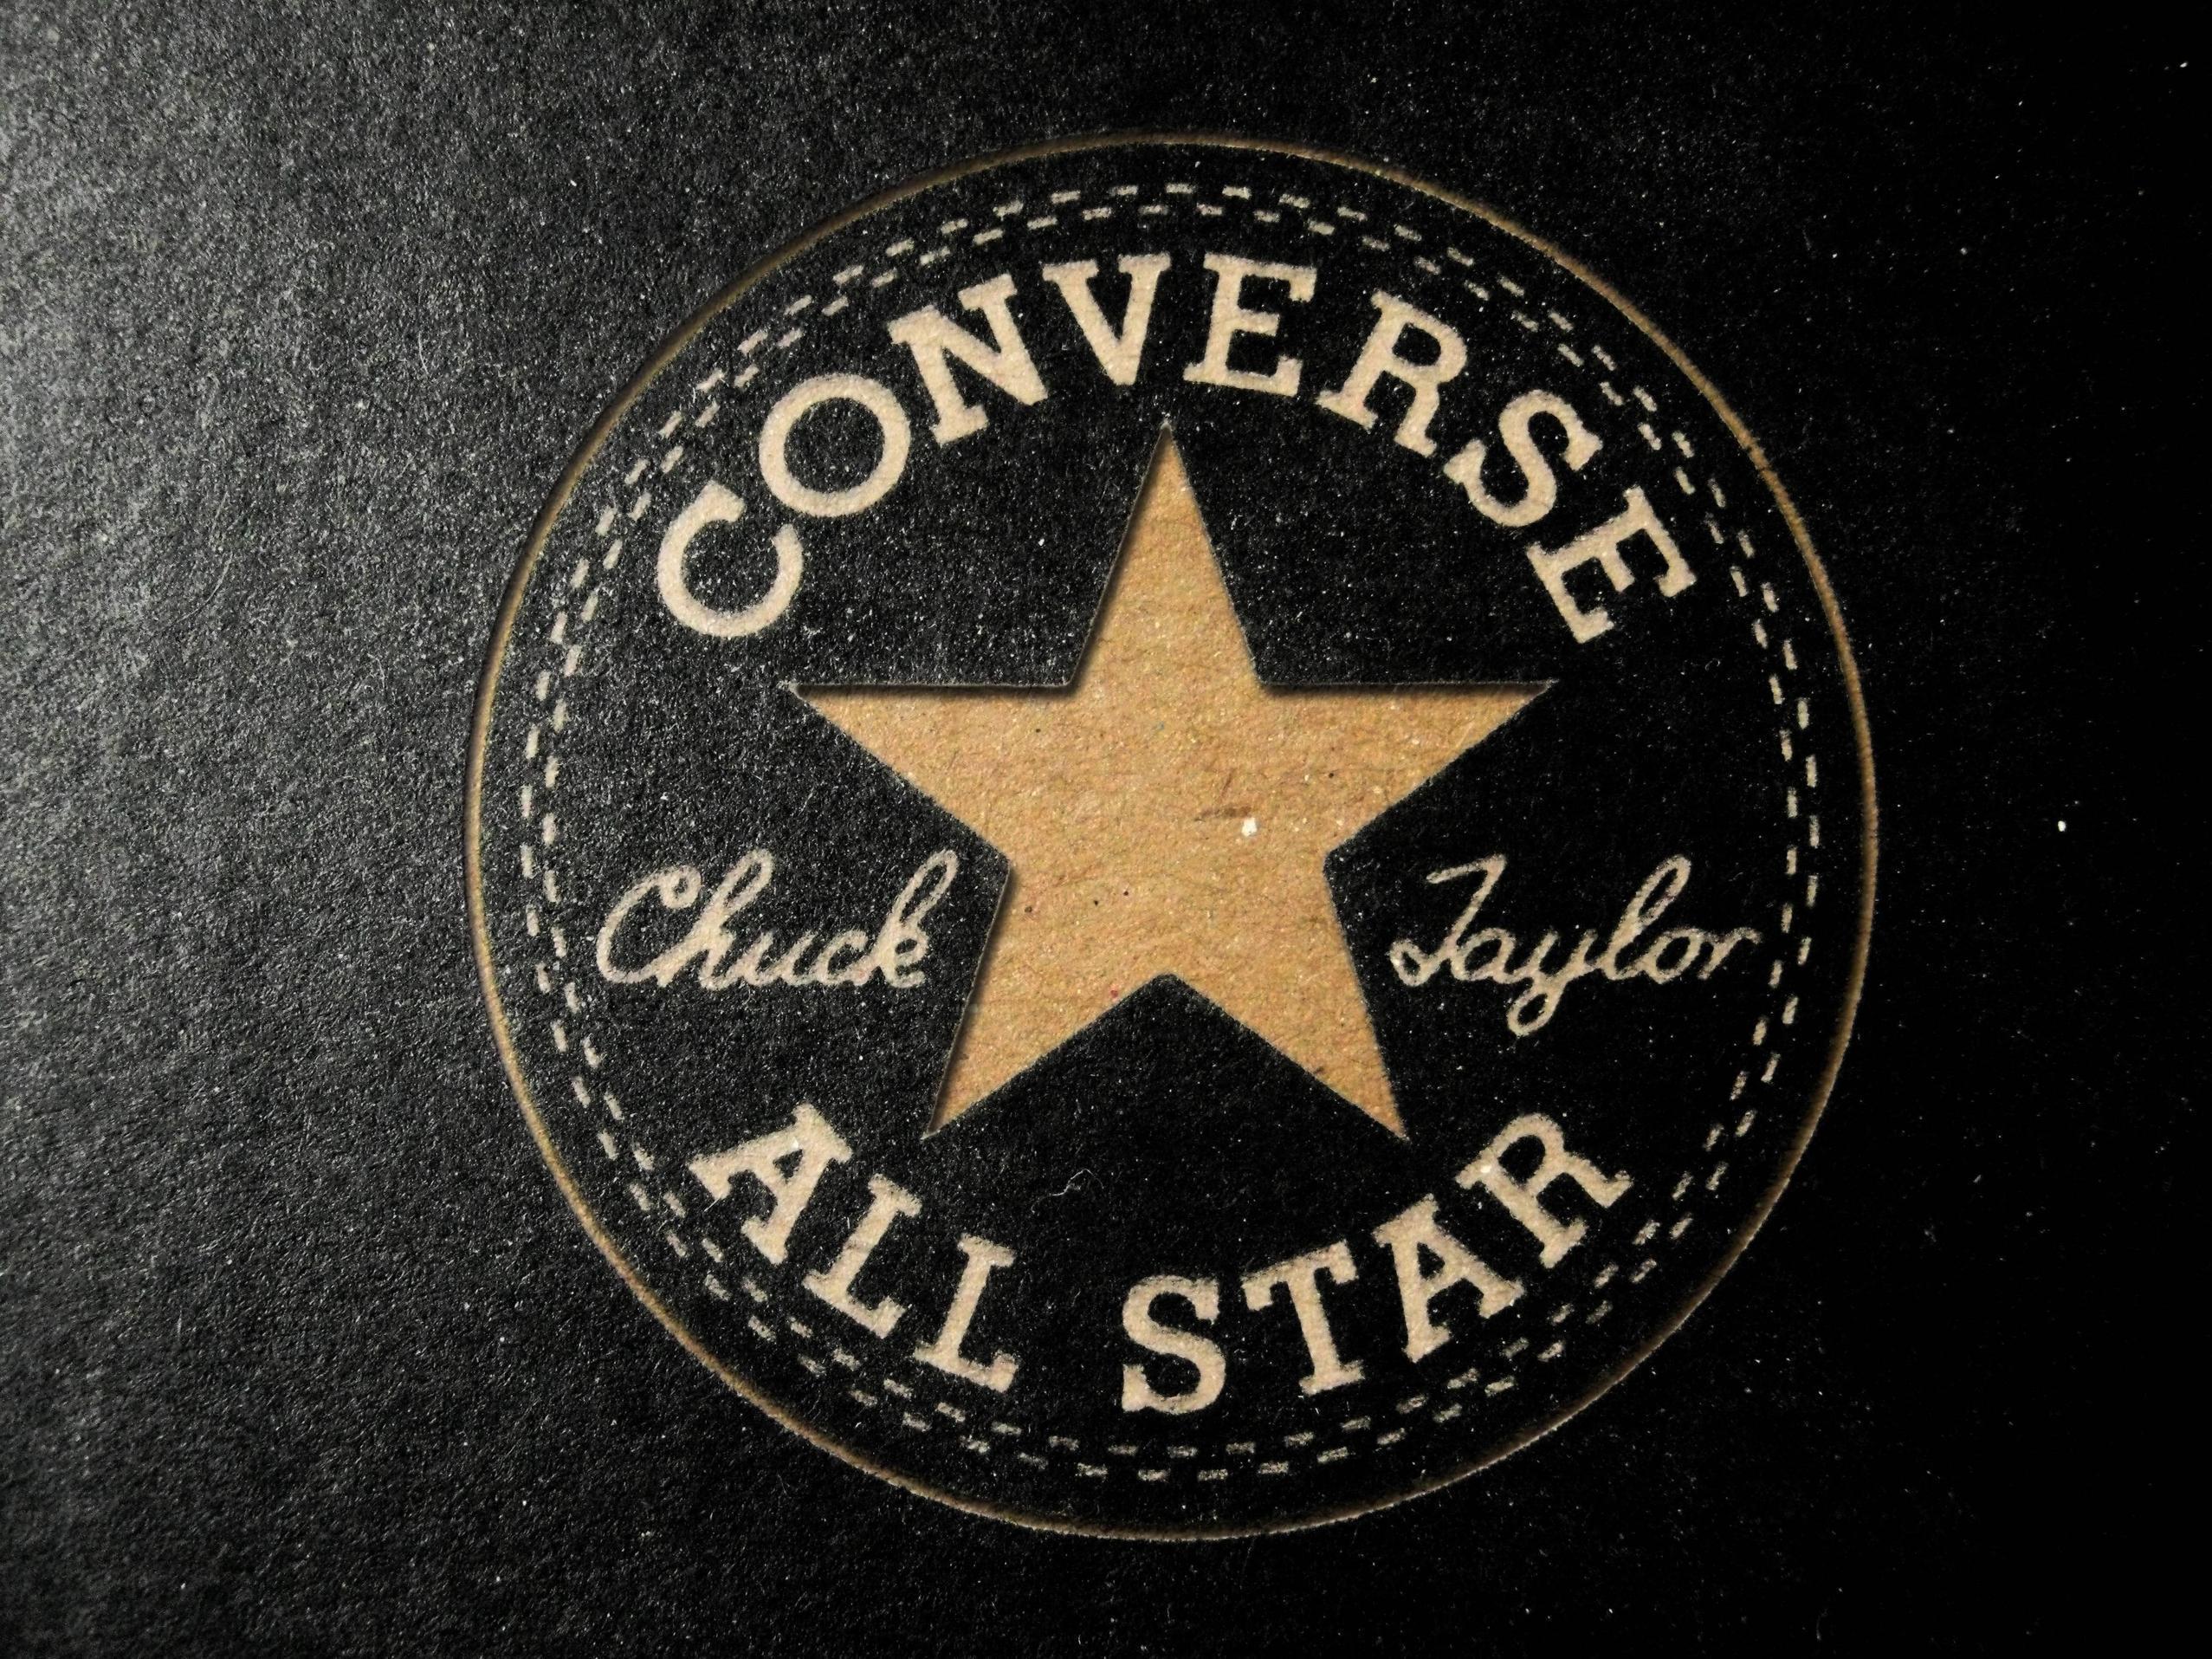 Fonds d&Converse All Star : tous les wallpapers Converse All